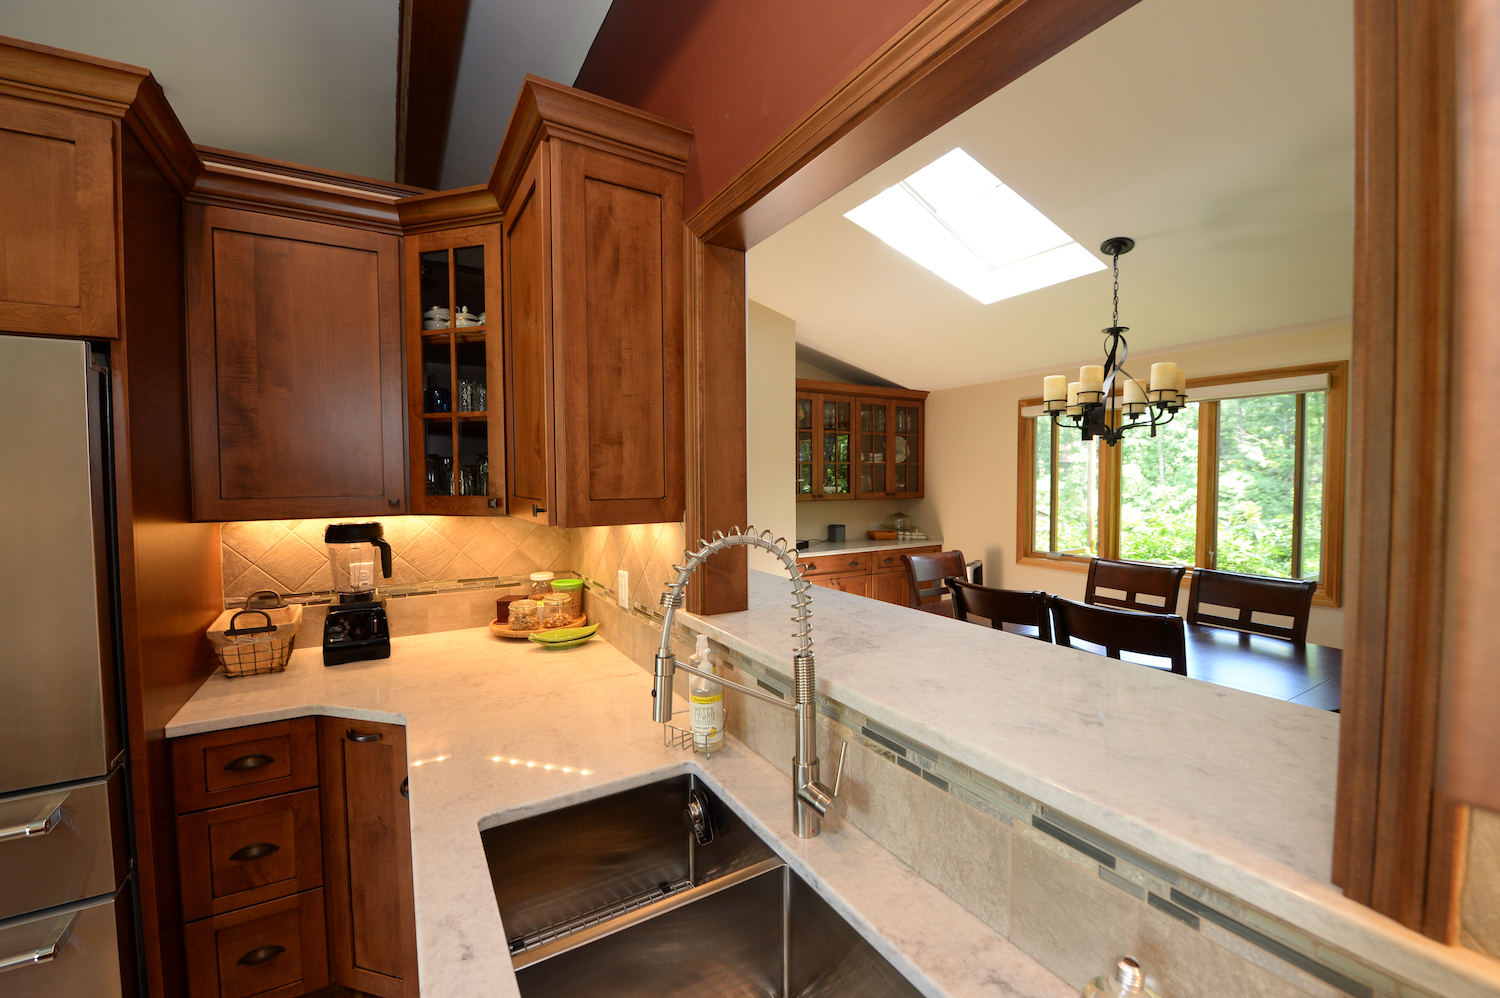 Custom Wood Cabinets with White Marble Countertops